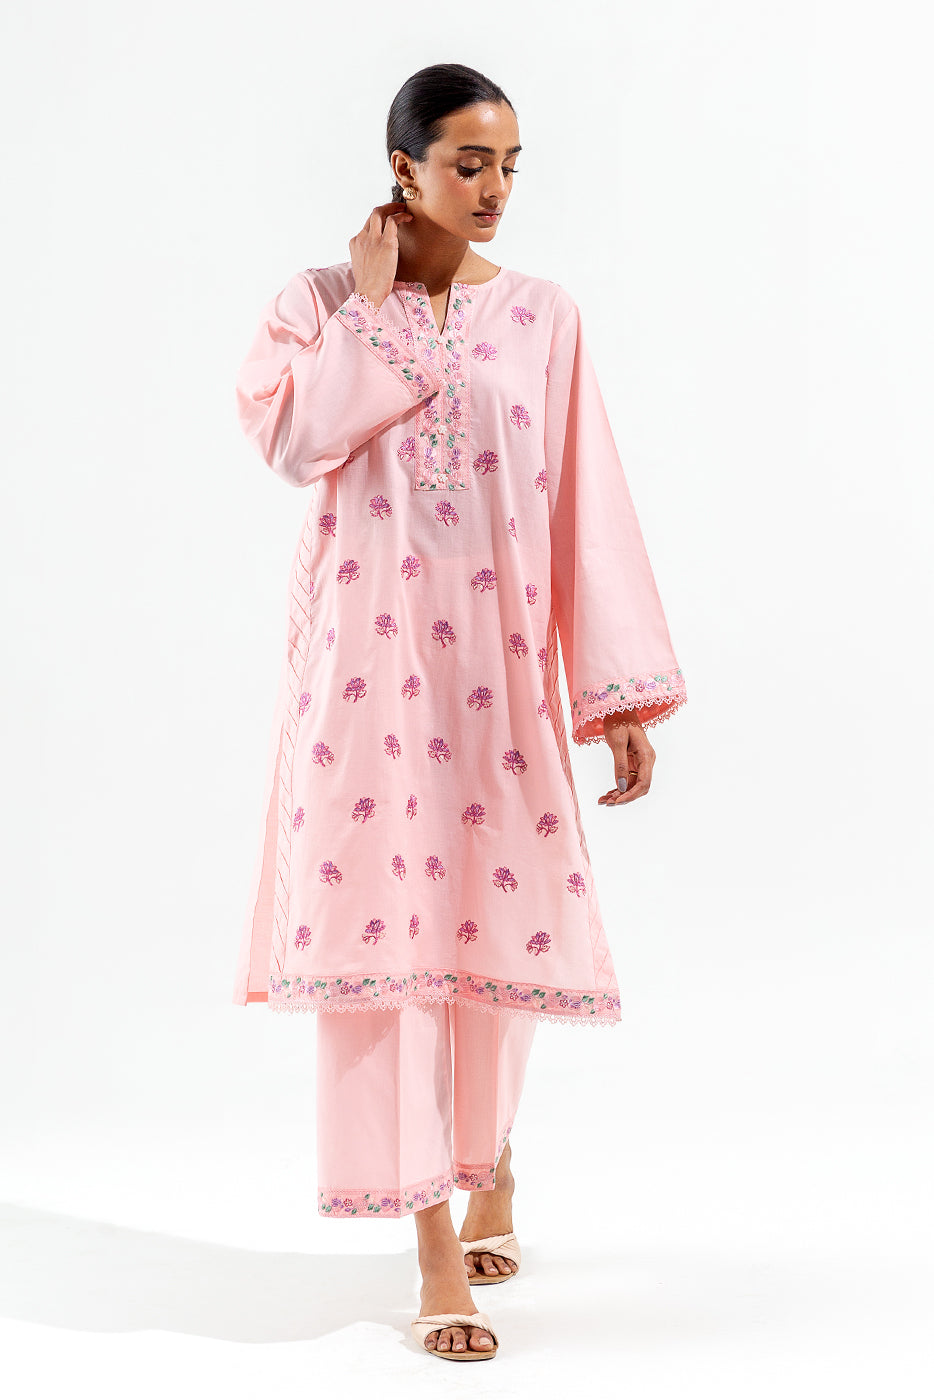 2 PIECE EMBROIDERED LAWN SUIT (PRET) - BEECHTREE